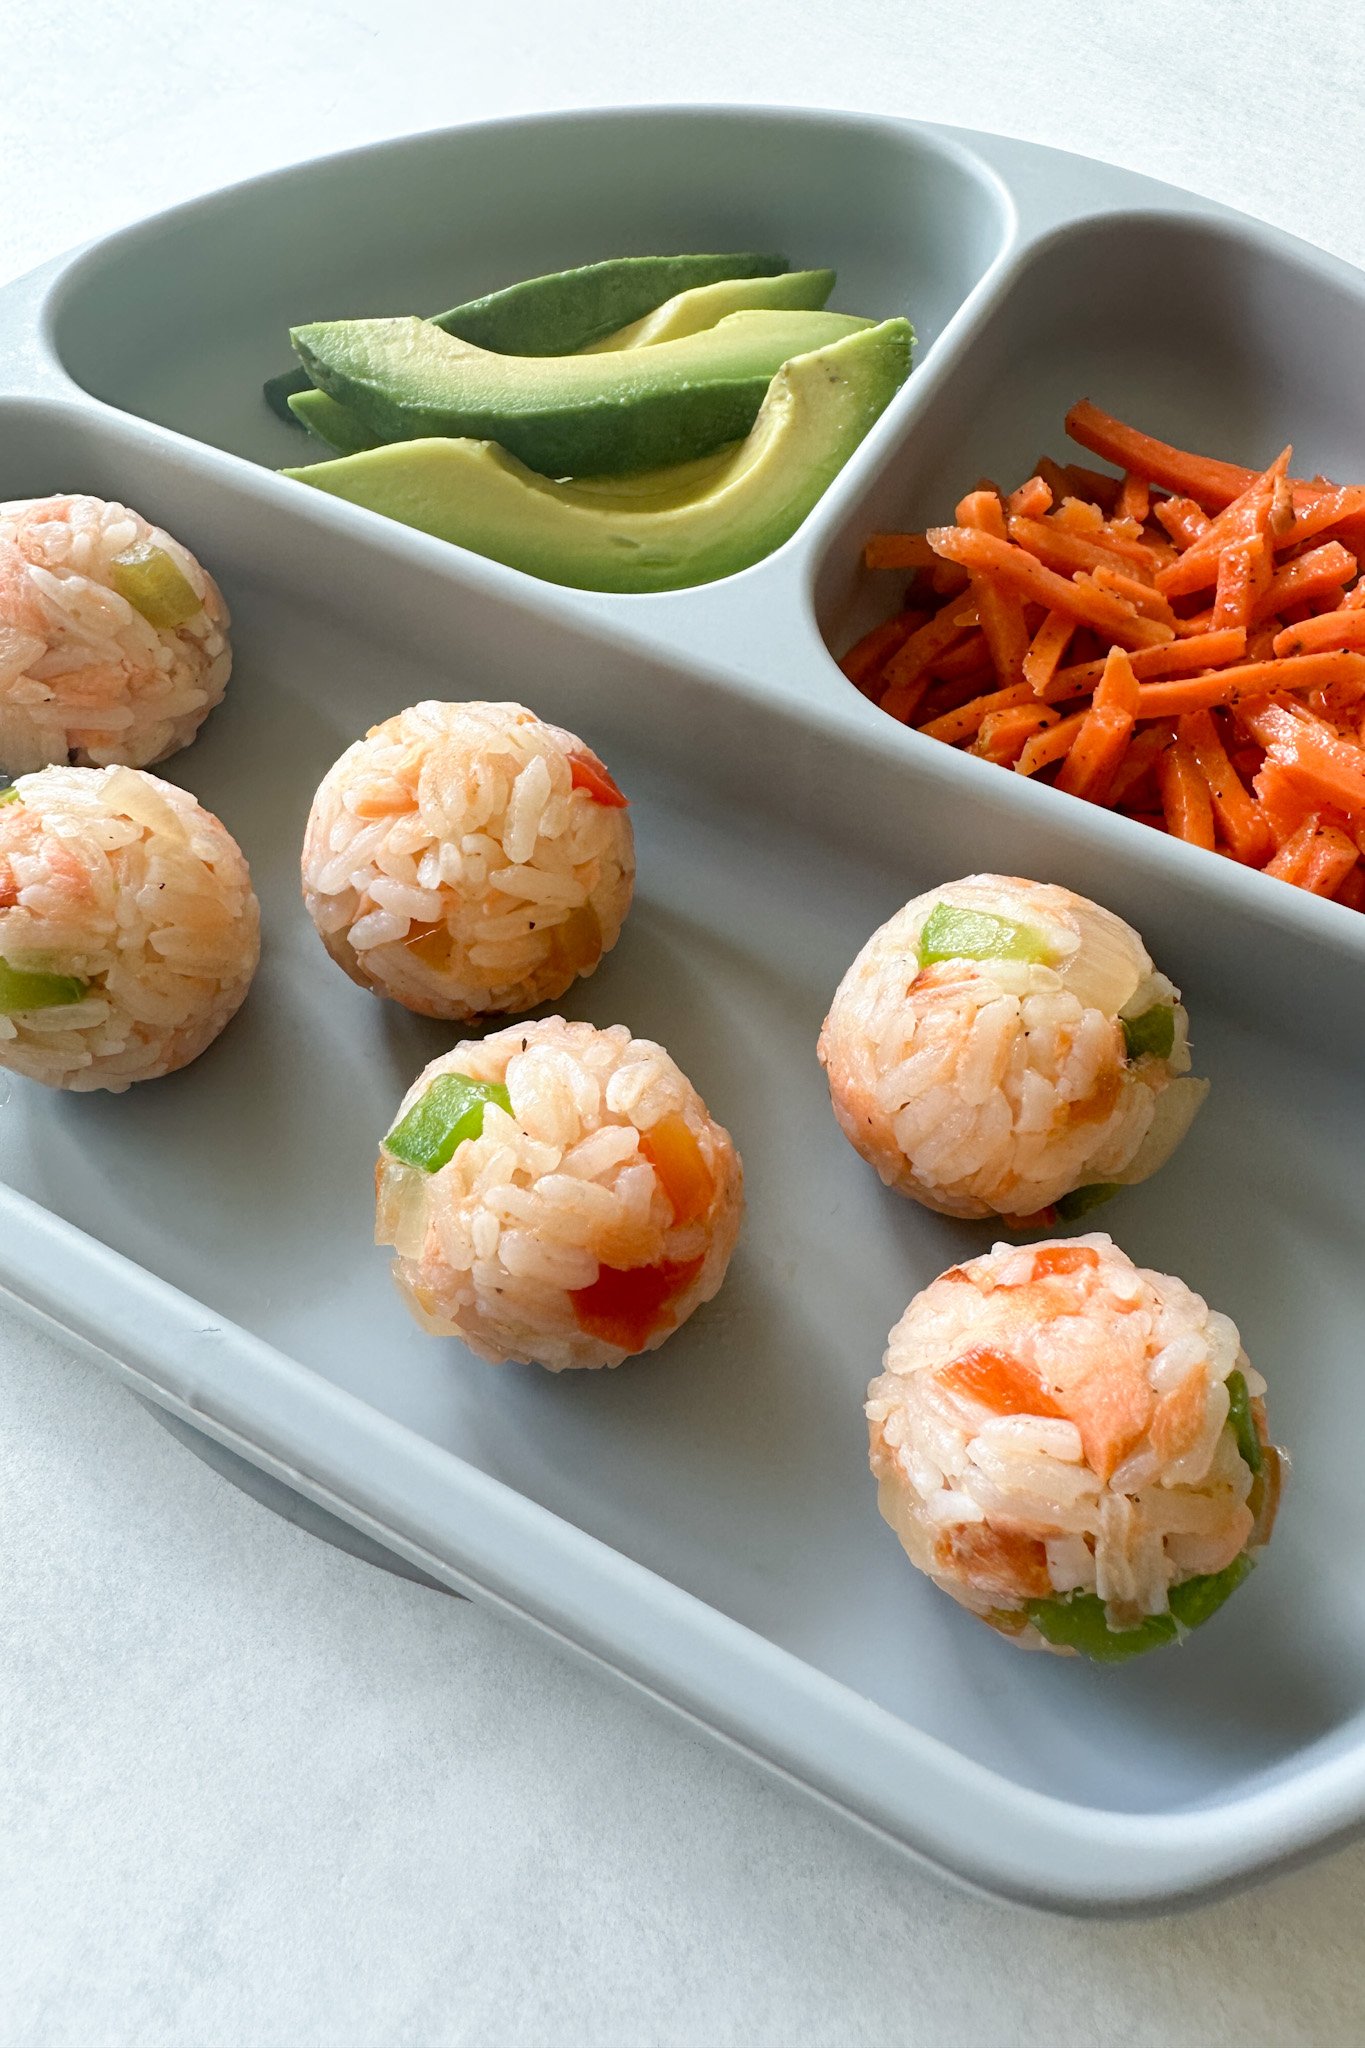 Salmon rice balls served with avocado and carrots.